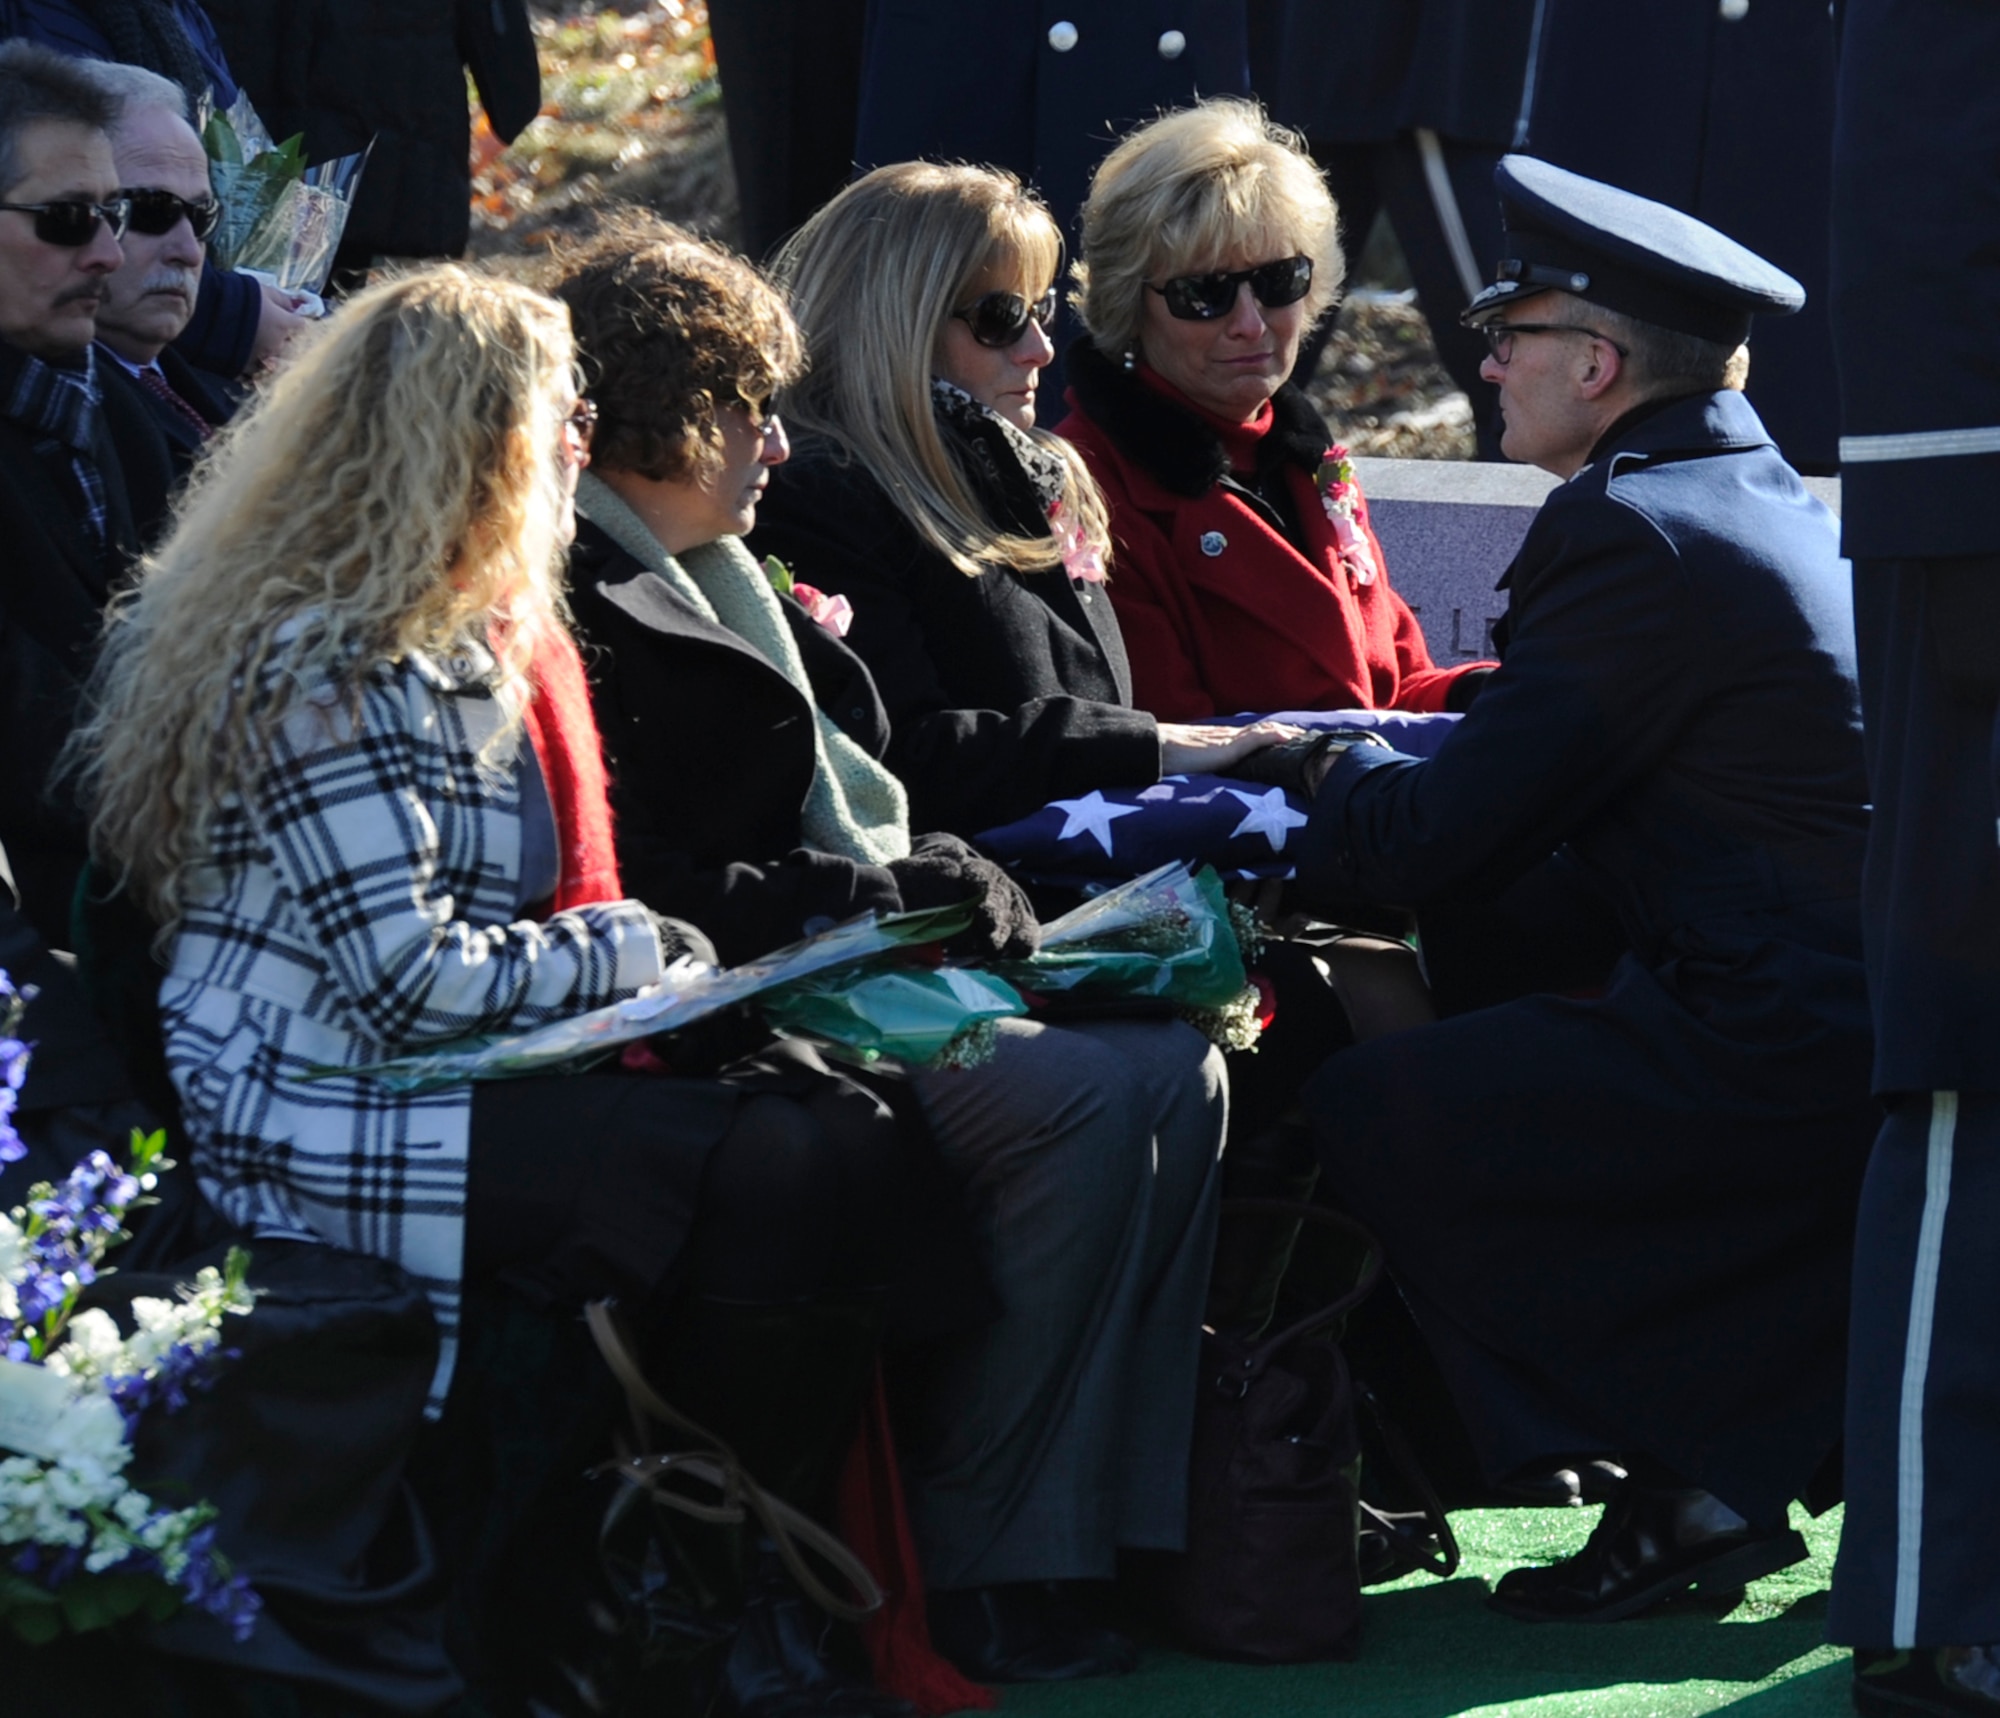 A flag was presented to the family of Col. Francis J. McGouldrick Jr. during his funeral Dec. 13, 2013, at Arlington National Cemetery, Va. McGouldrick was missing in action since 1968 when his plane collided with another plane. His remains were found in a remote jungle in Laos. (U.S. Air Force photo/Airman 1st Class Ryan J. Sonnier)